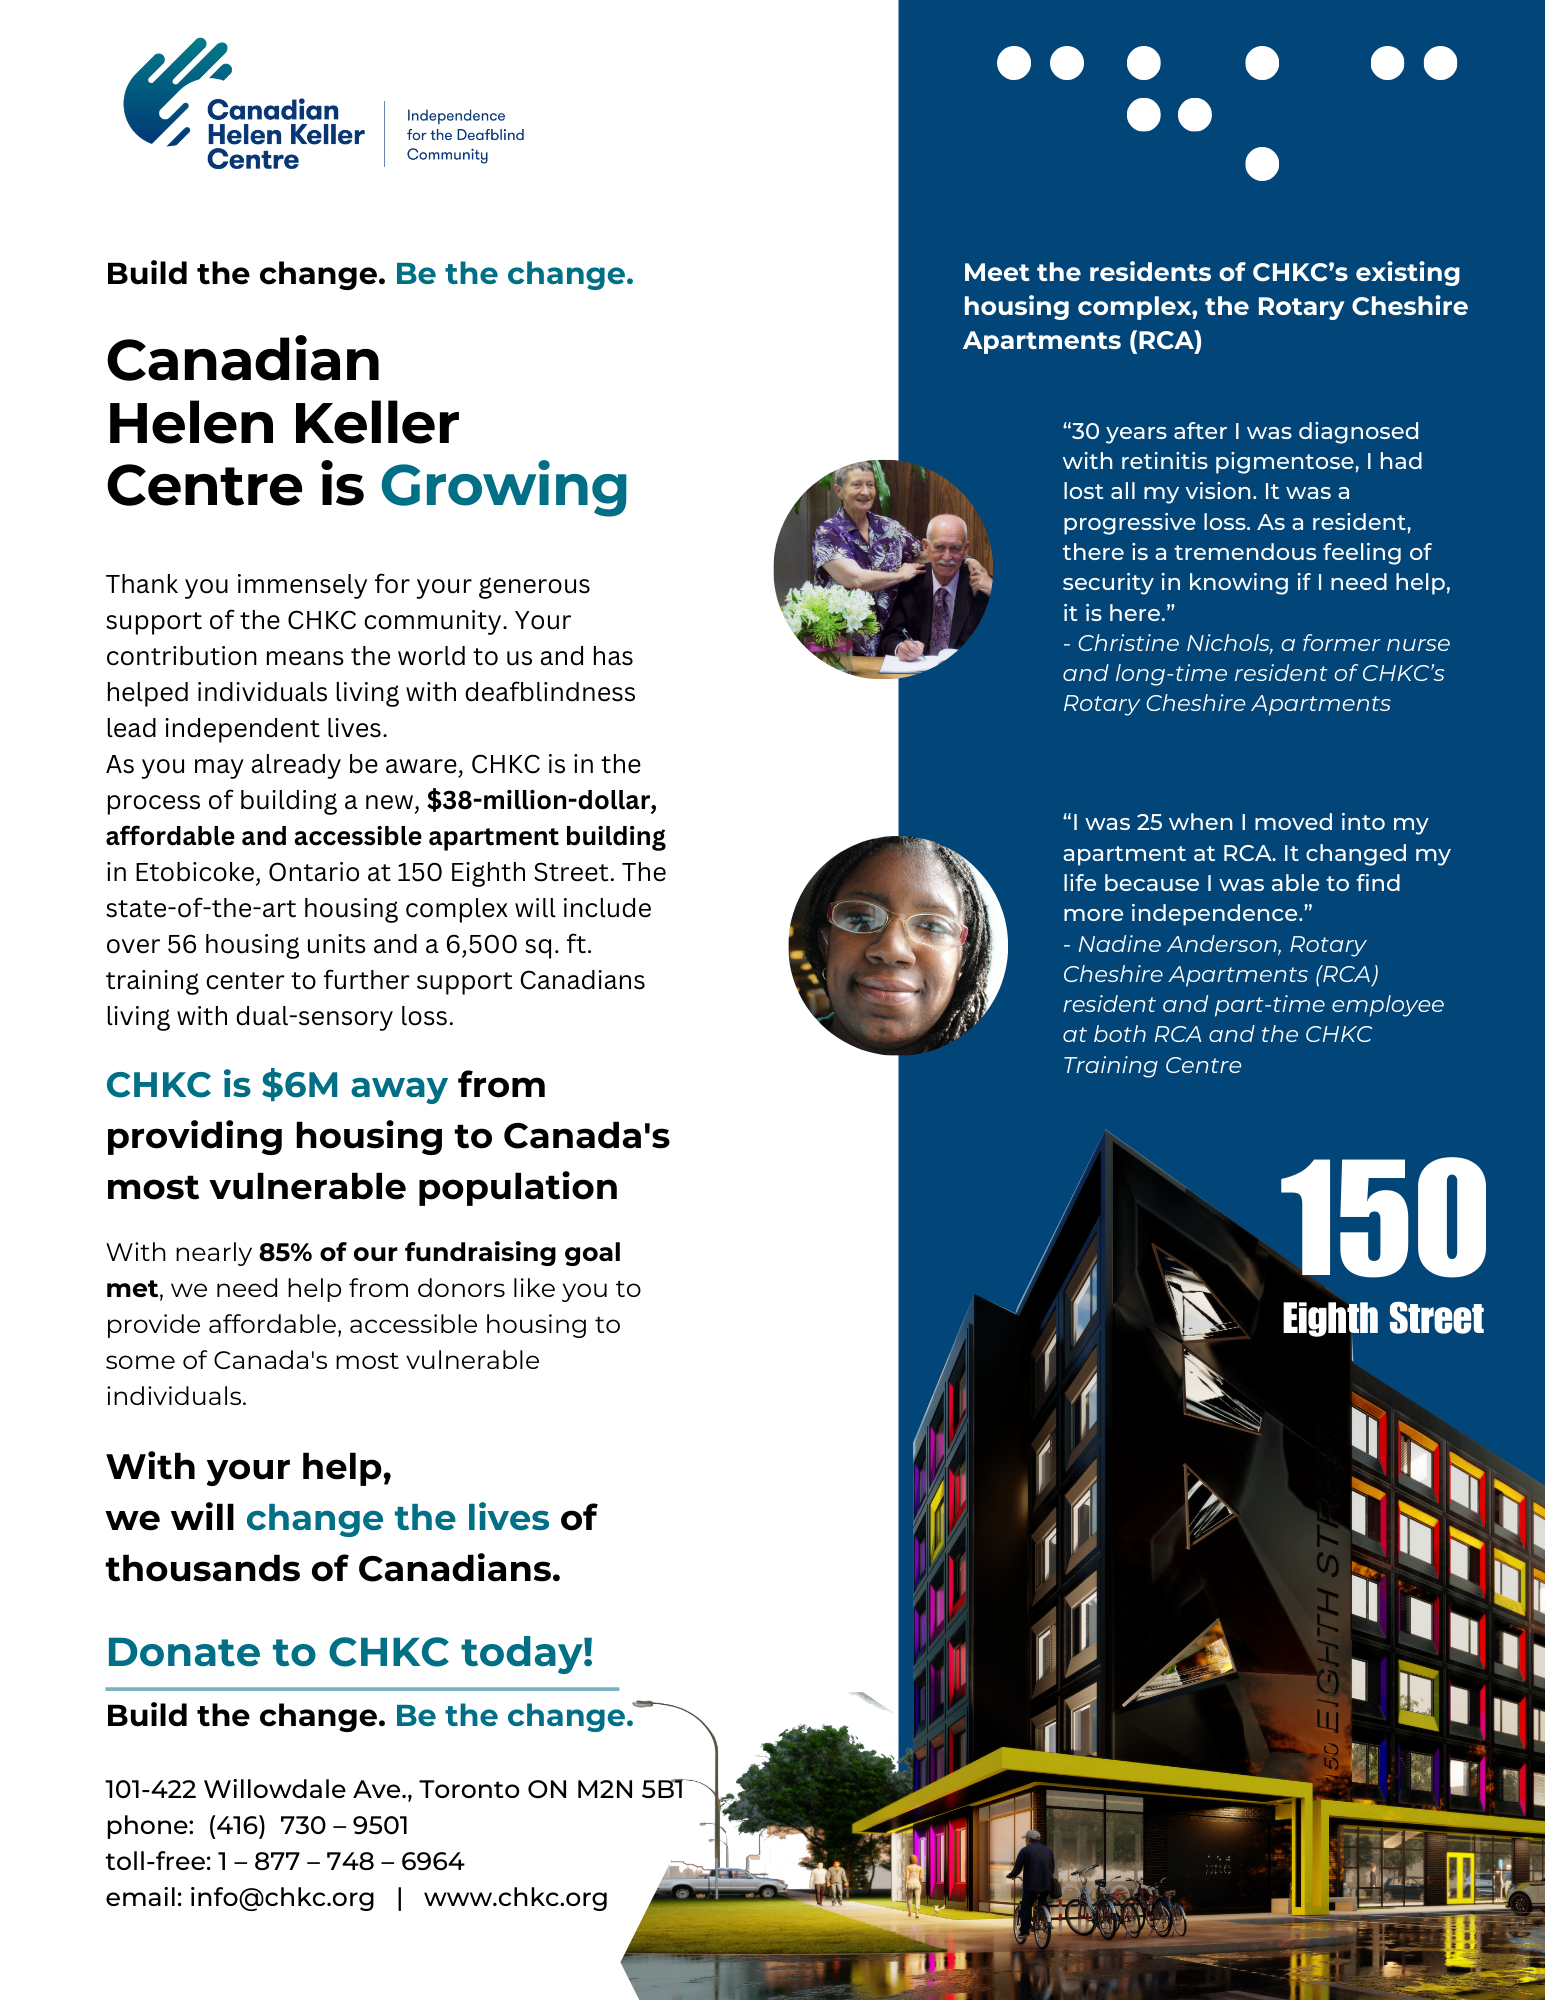 The text says: Build the change. Be the change. Canadian Helen Keller Centre is Growing. Thank you immensely for your generous support of the CHKC community. Your contribution means the world to us and has helped individuals living with deafblindness lead independent lives. As you may already be aware, CHKC is in the process of building a new, $38-million-dollar, affordable and accessible apartment building in Etobicoke, Ontario at 150 Eighth Street. The state-of-the-art housing complex will include over 56 housing units and a 6,500 sq. ft. training center to further support Canadians living with dual-sensory loss. CHKC is $6M away from providing housing to Canada's most vulnerable population. With nearly 85% of our fundraising goal met, we need help from donors like you to provide affordable, accessible housing to some of Canada's most vulnerable individuals. With your help, we will change the lives of thousands of Canadians. Donate to CHKC today! Build the change. Be the change. 101-422 Willowdale Ave., Toronto ON M2N 5B1 phone: (416) 730 – 9501 toll-free: 1 – 877 – 748 – 6964 email: info@chkc.org | www.chkc.org. Meet the residents of CHKC’s existing housing complex, the Rotary Cheshire Apartments (RCA) “30 years after I was diagnosed with retinitis pigmentose, I had lost all my vision. It was a progressive loss. As a resident, there is a tremendous feeling of security in knowing if I need help, it is here.” - Christine Nichols, a former nurse and long-time resident of CHKC’s Rotary Cheshire Apartments “I was 25 when I oved into my apartment at RCA. It changed my life because I was able to find more independence.” - Nadine Anderson, Rotary Cheshire Apartments (RCA) resident and part-time employee at both RCA and the CHKC Training Centre